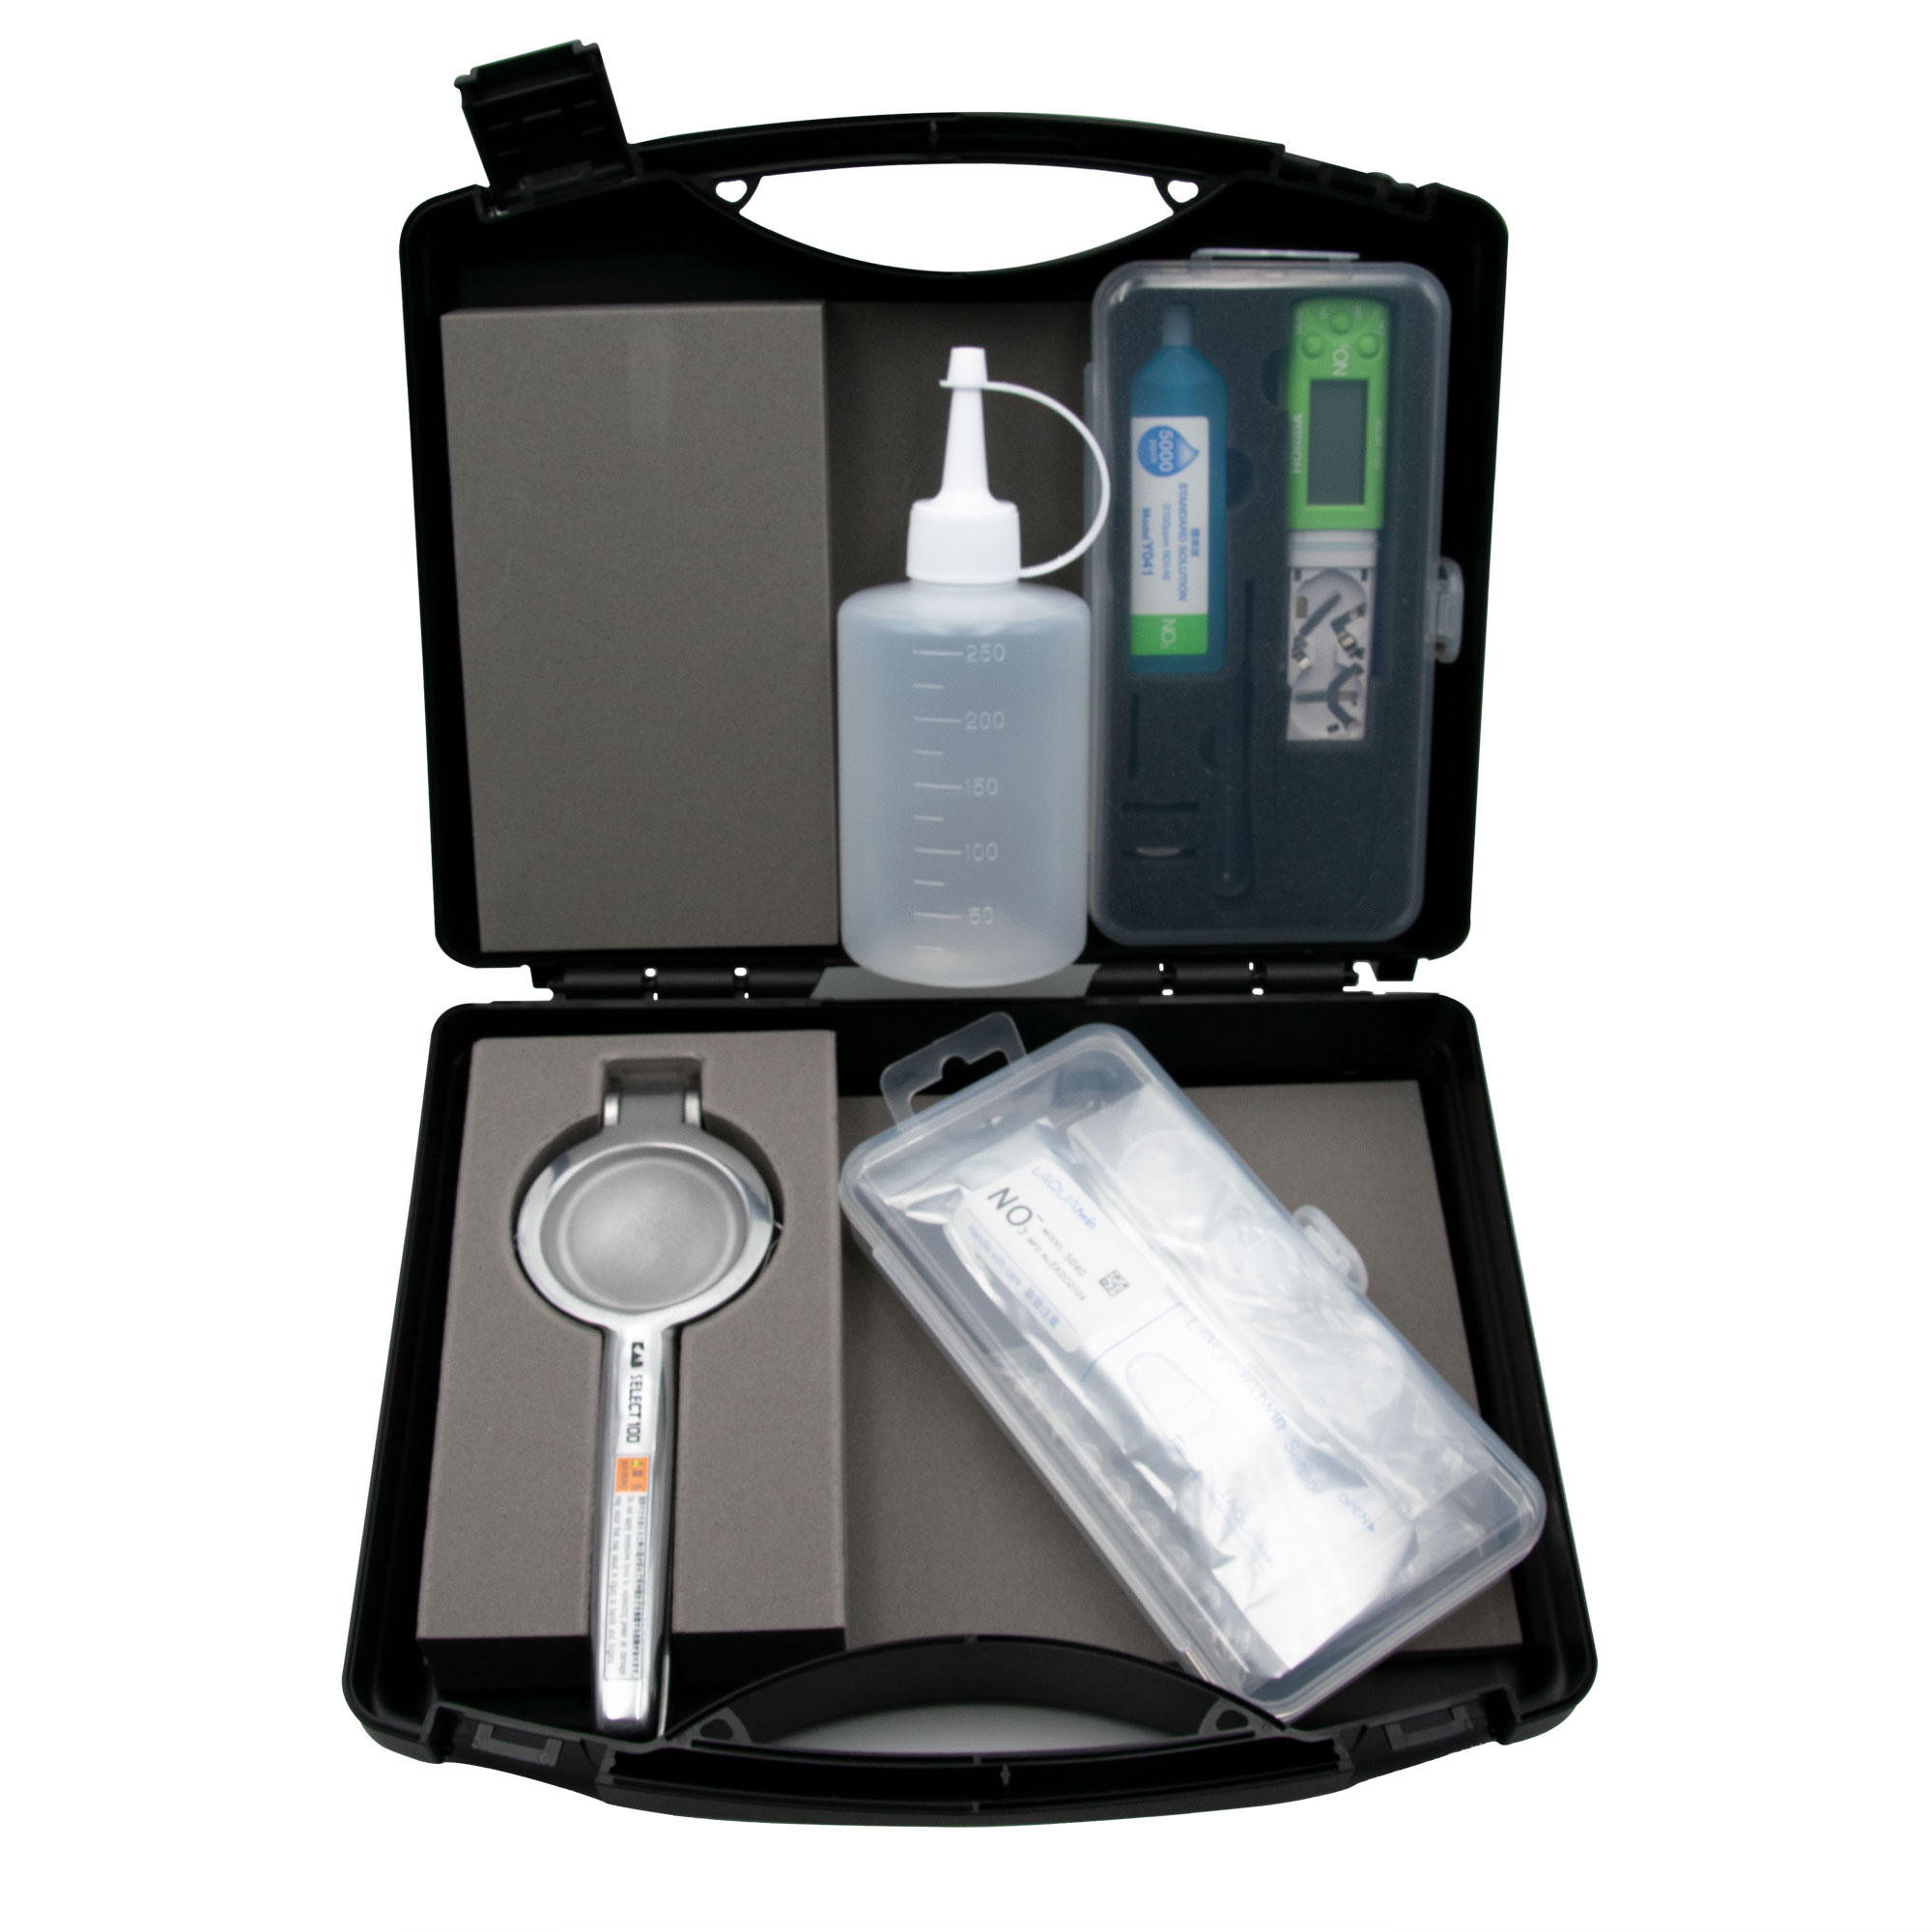 Horiba LAQUAtwin Nitrate Ion (NO3-) Tester for crops, in carrying case with 5 Pipettes, Crop sample press, 3 cups